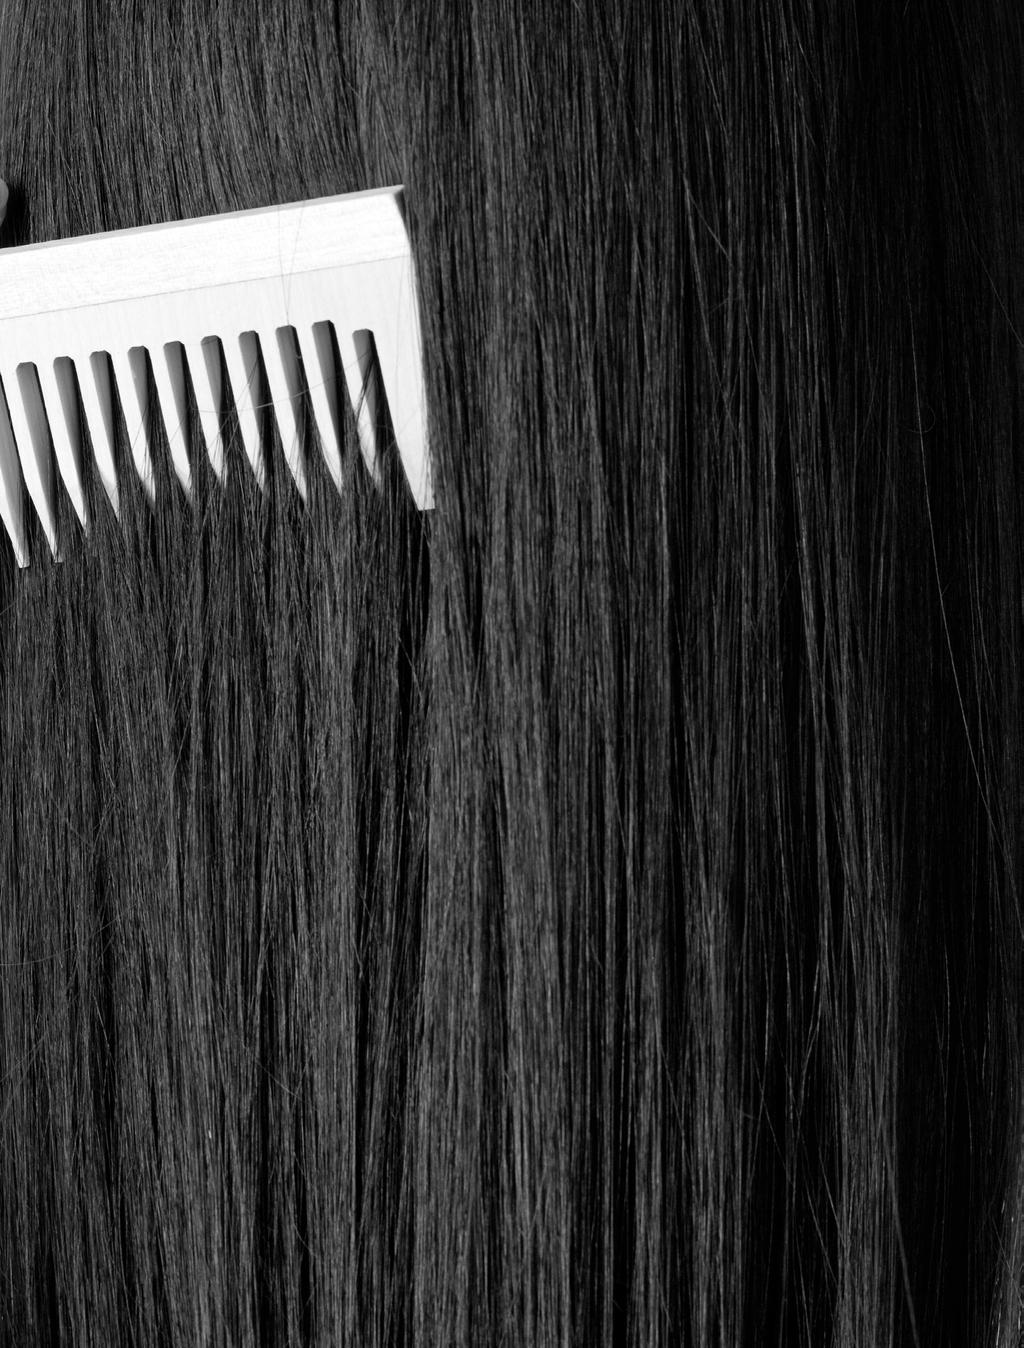 As you go about your day, your hair collects dirt, toxins, and contaminants which can damage or dry out hair, leaving it brittle and dull looking.